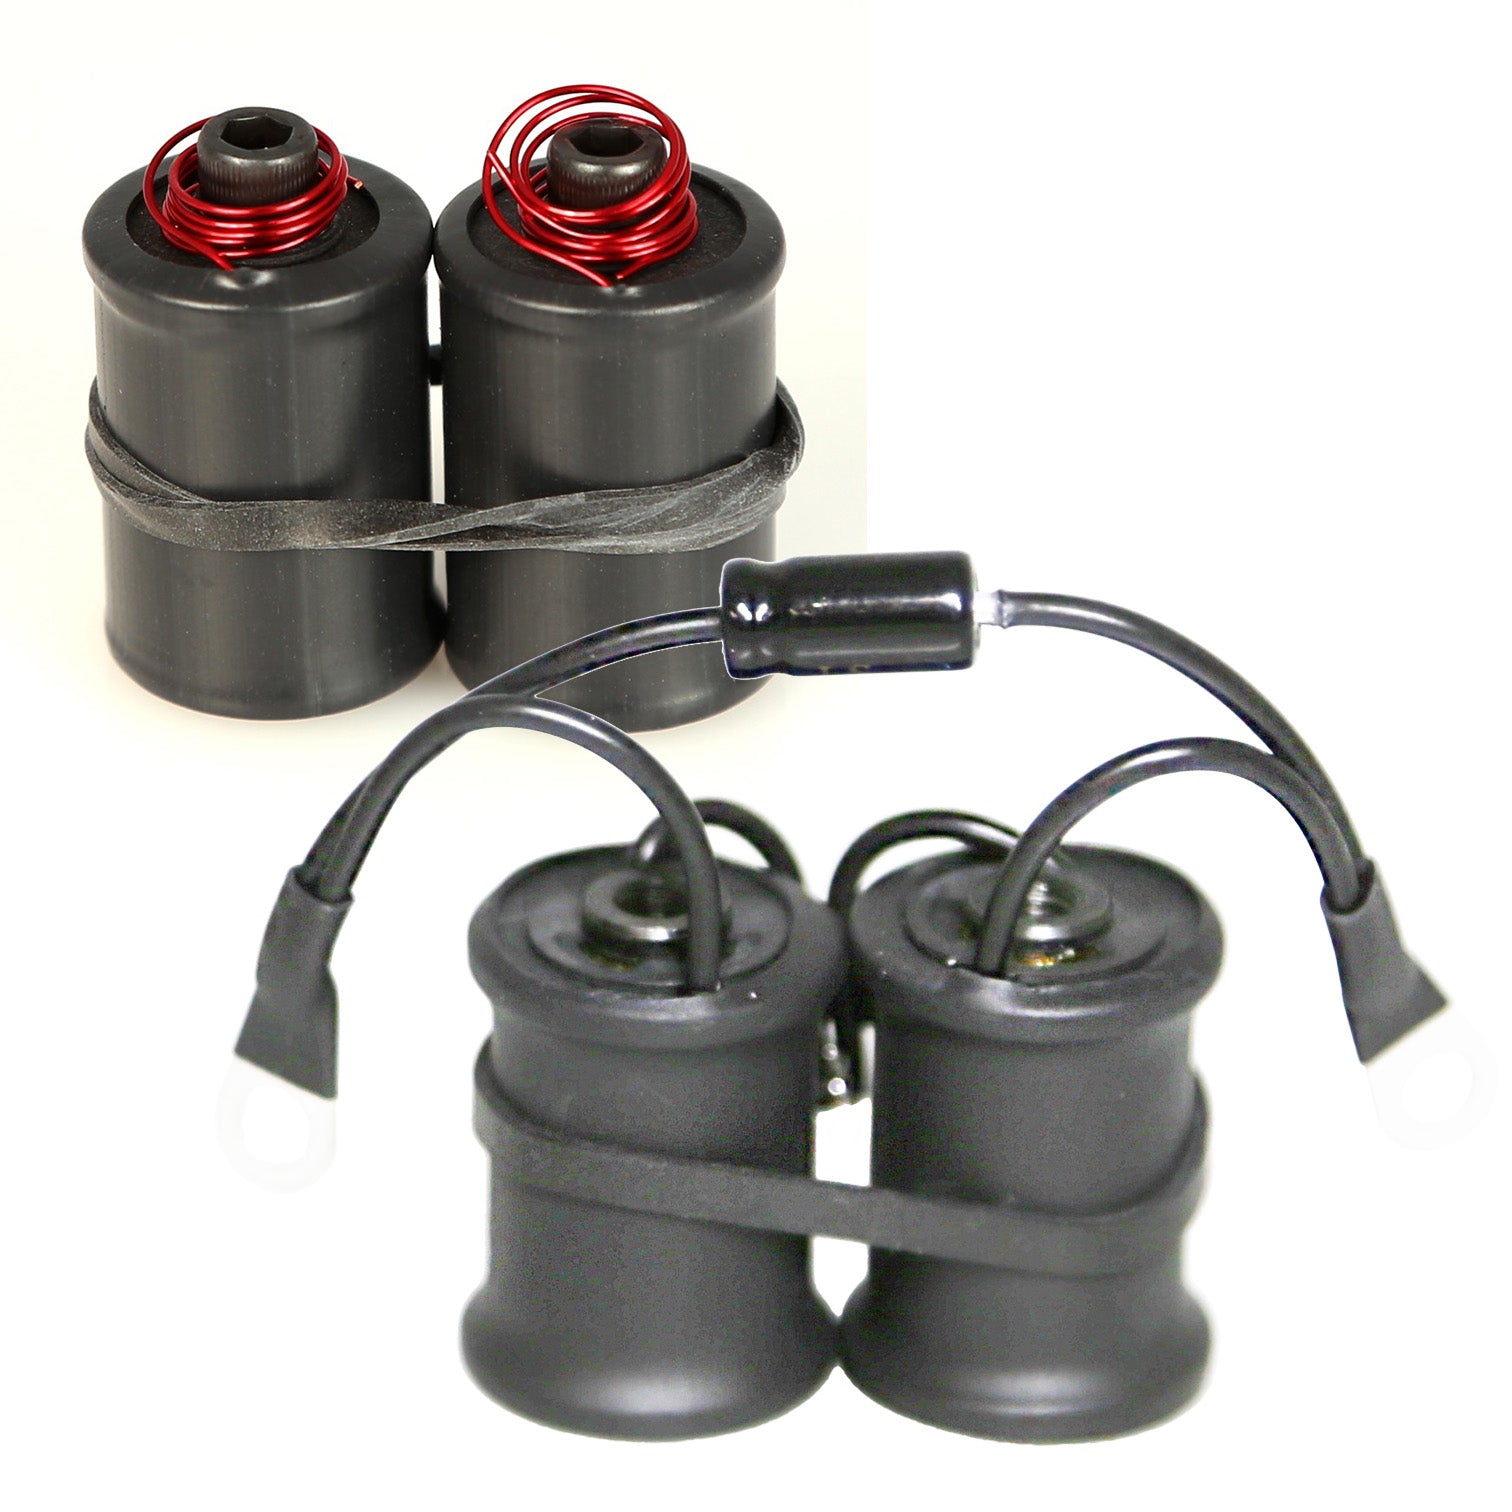 1 1/8" Coils With Black Heat Shrink With and Without Capacitor